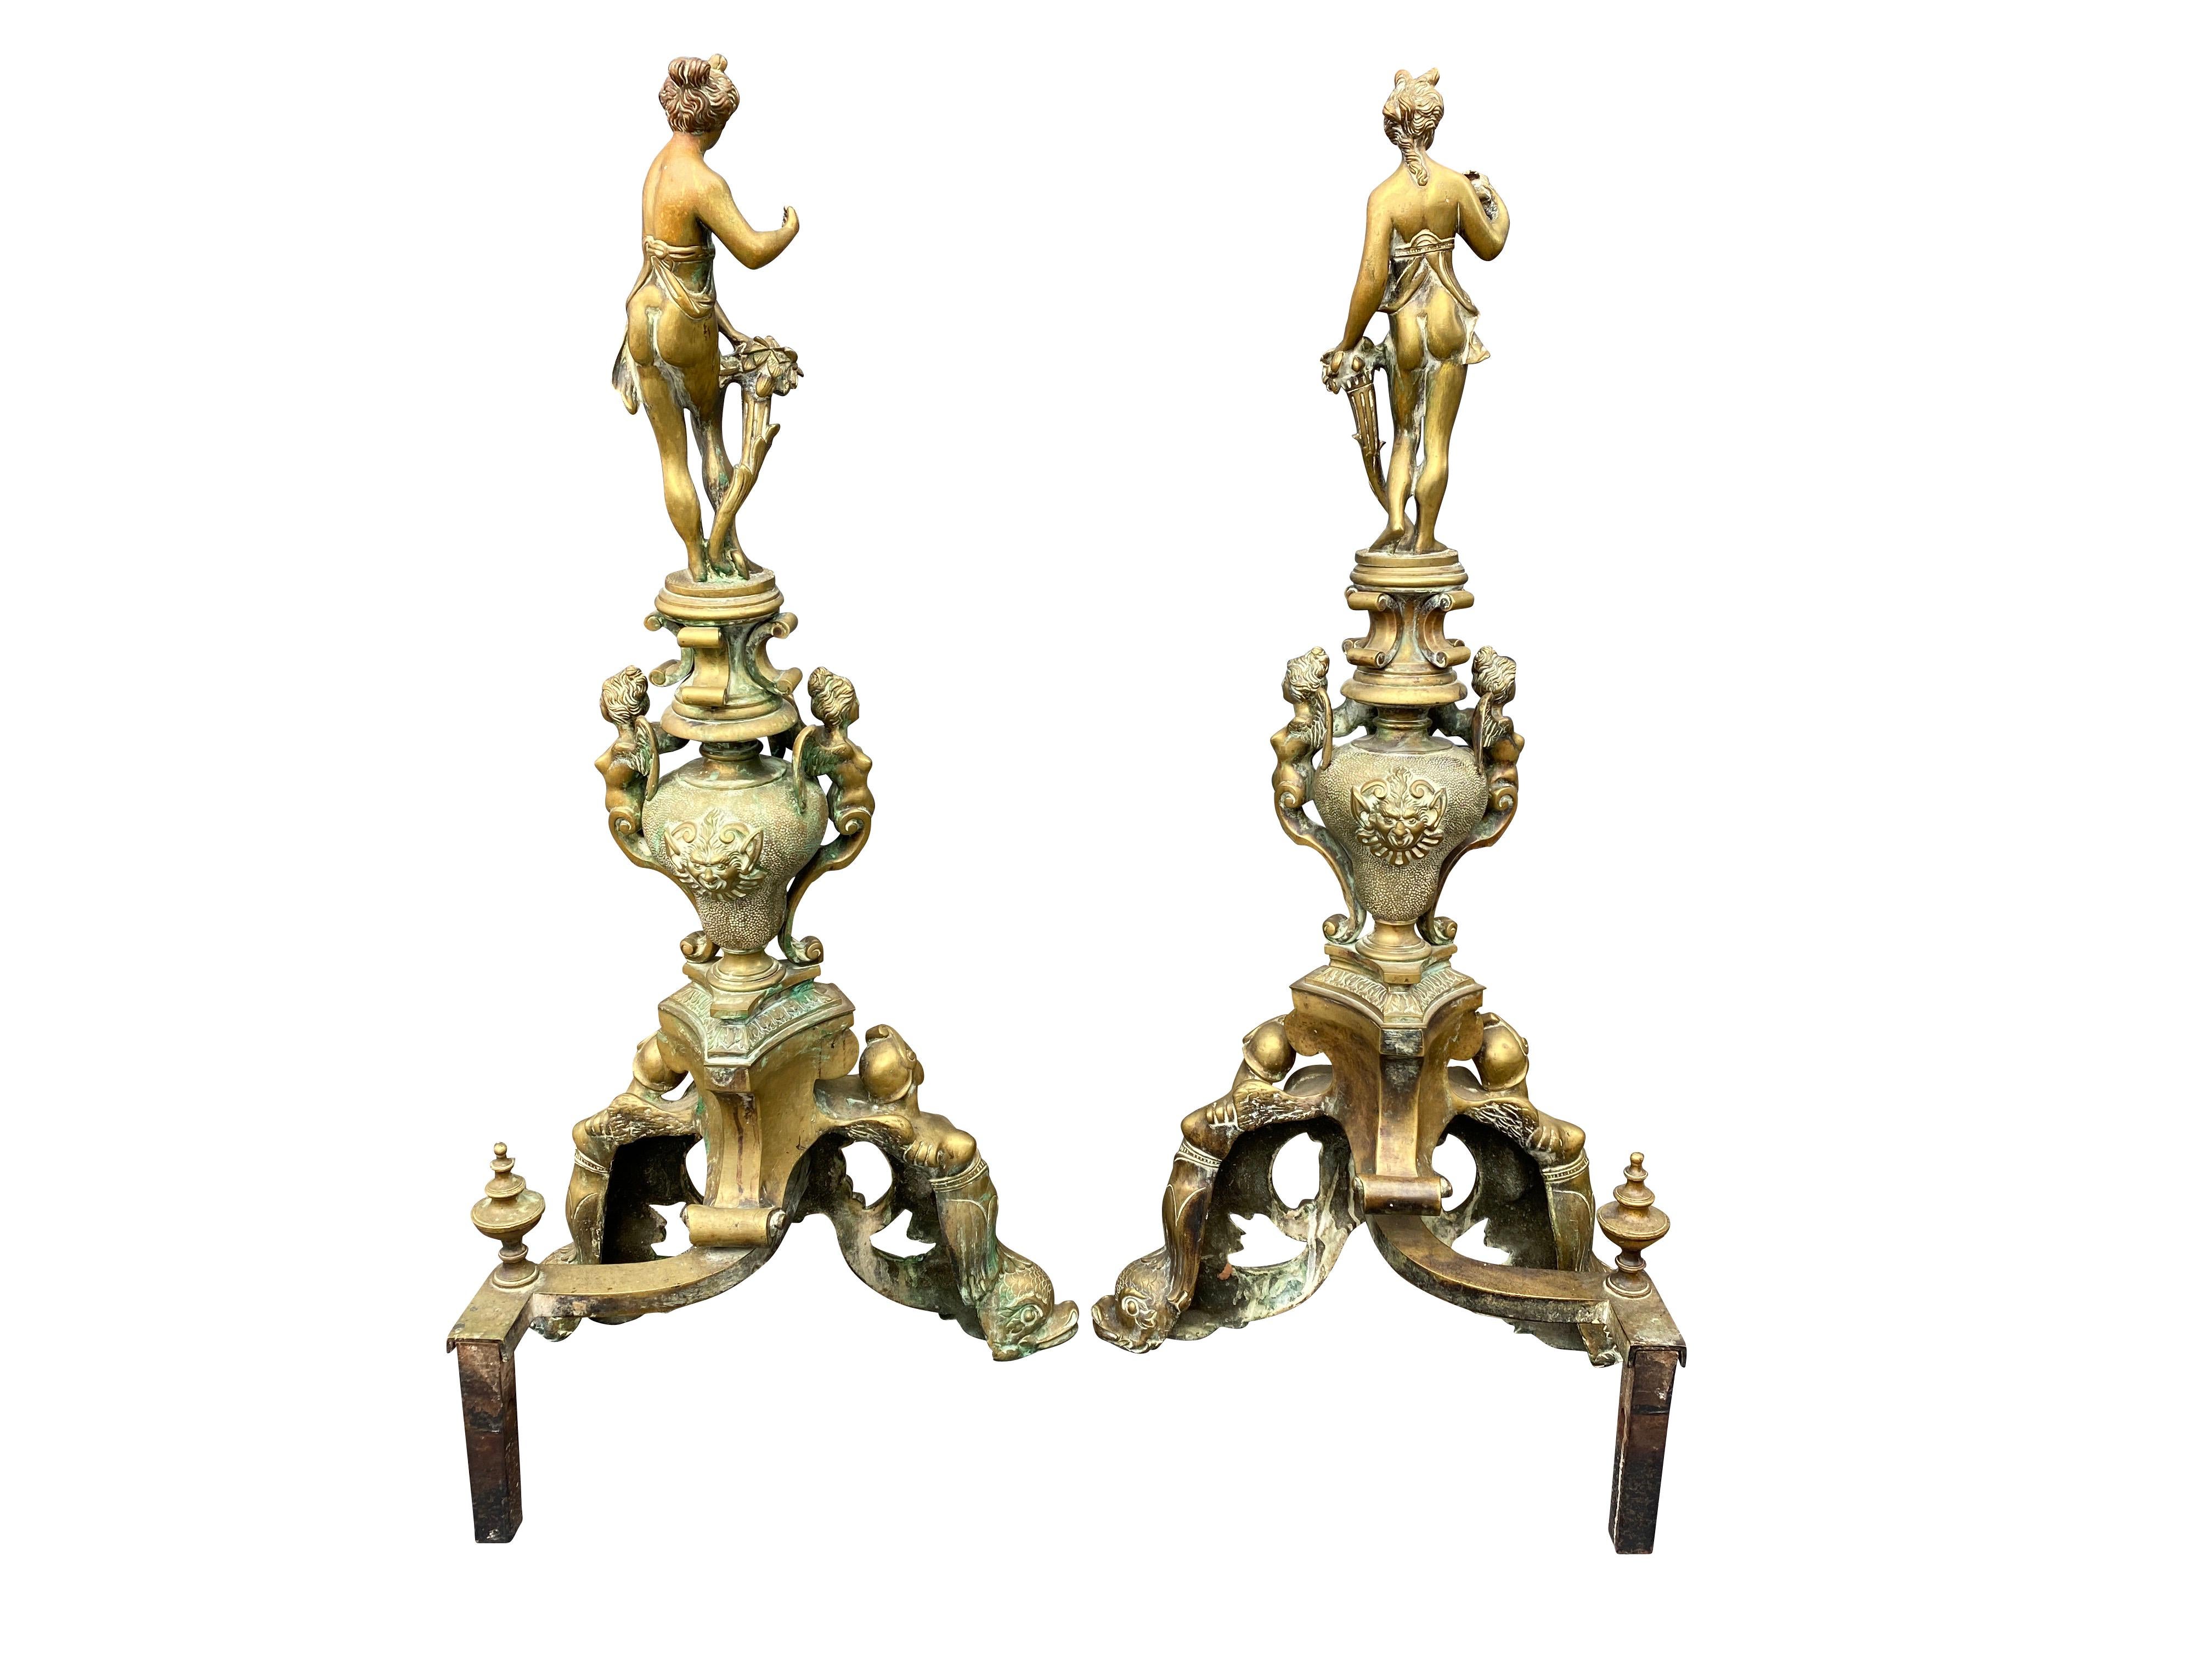 Each with a semi clad maiden finial over various Renaissance motifs on dolphin form supports.